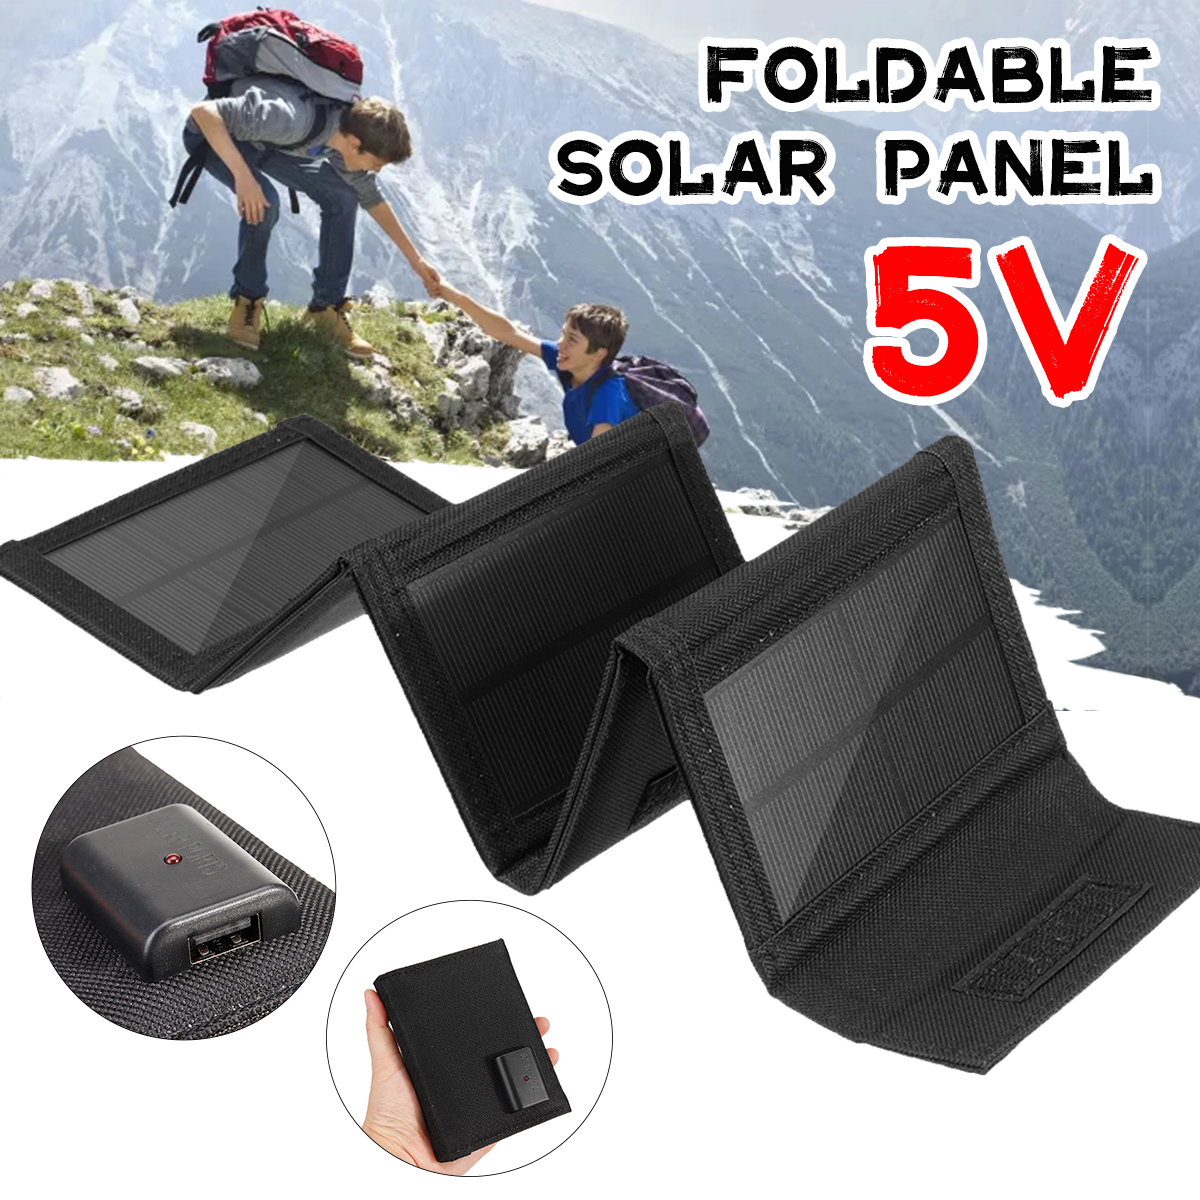 80W-5V-USB-Monocrystalline-Solar-Panel-Folding-Power-Bank-Outdoor-Camping-Hiking-Phone-Charger-1873791-1